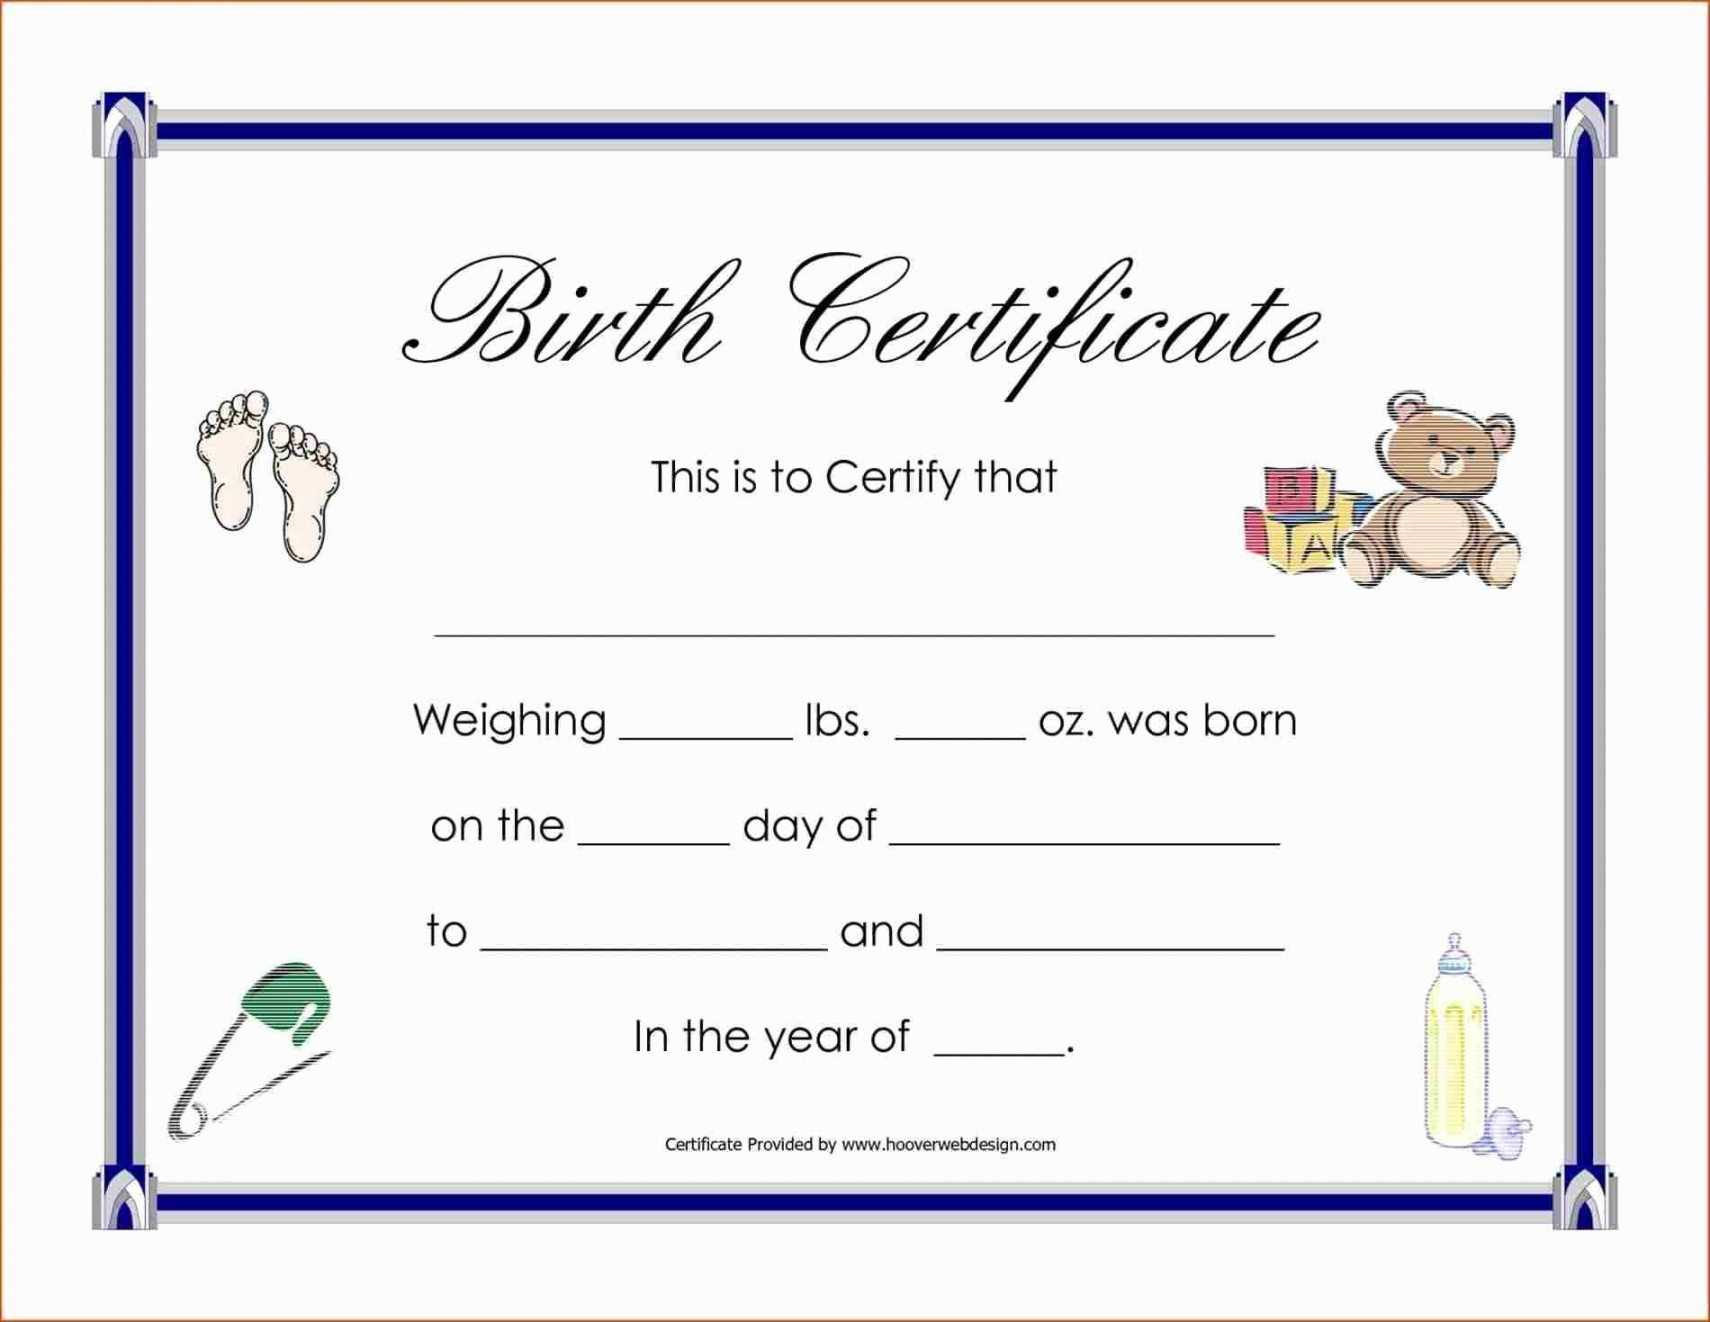 Blank Adoption Certificate Template throughout Blank Adoption Certificate Template